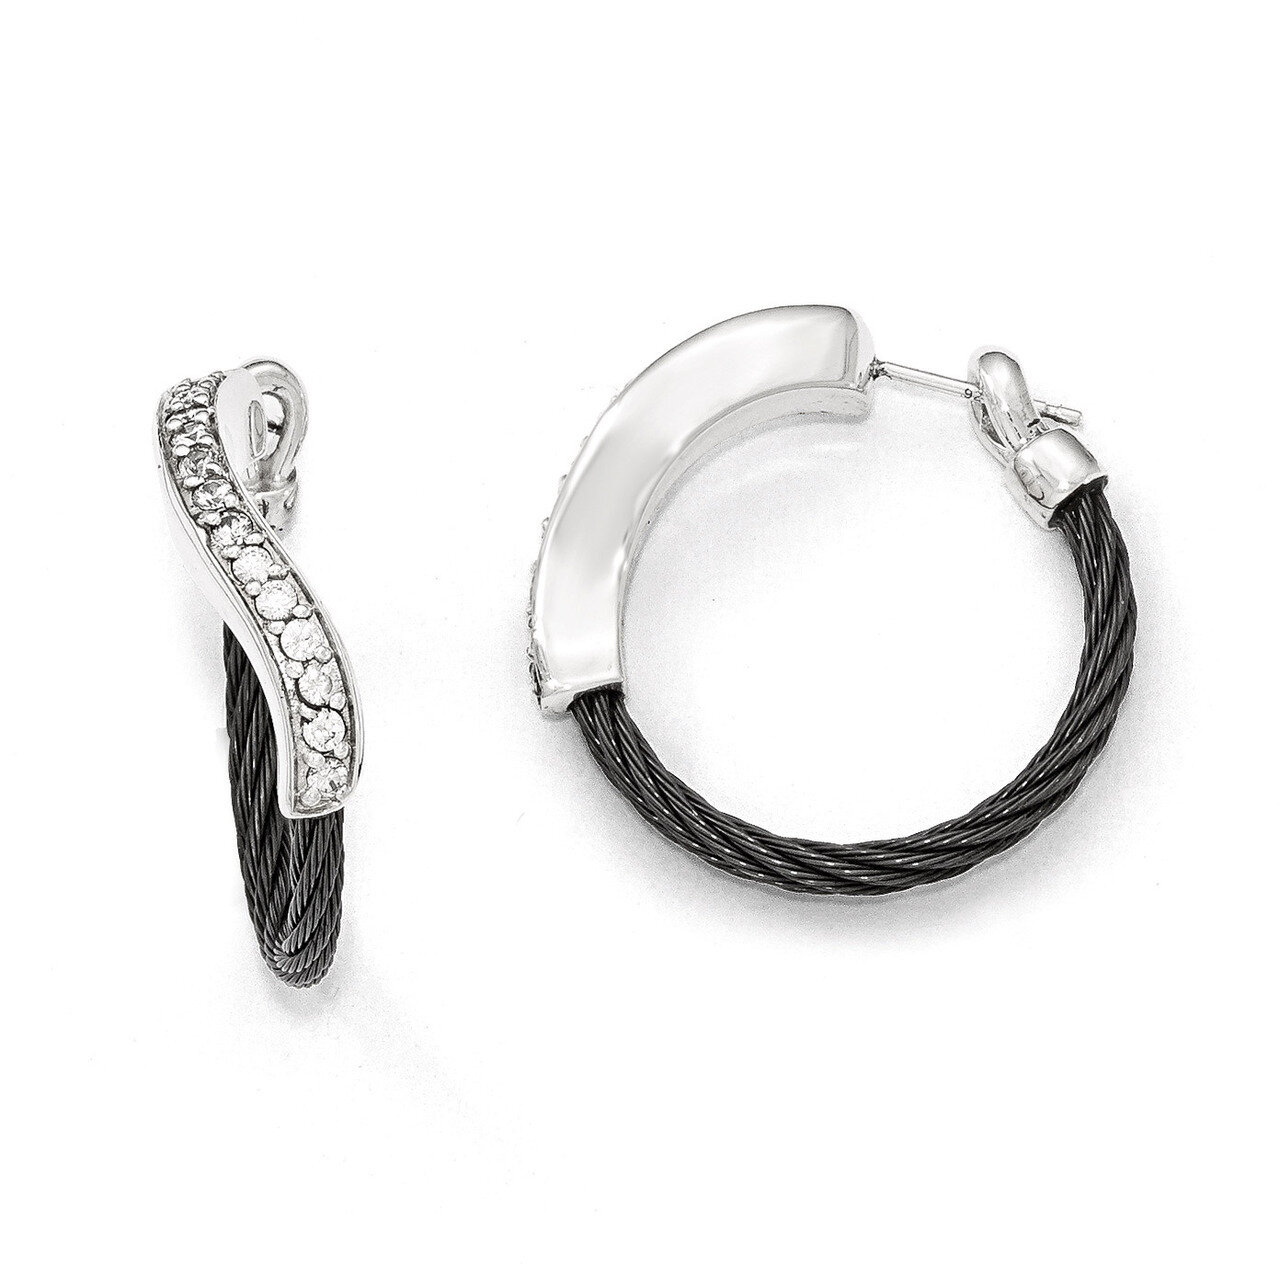 Edward Mirell Black Memory Cable & Argentium Sterling Silver & White Sapphire Earrings EME115